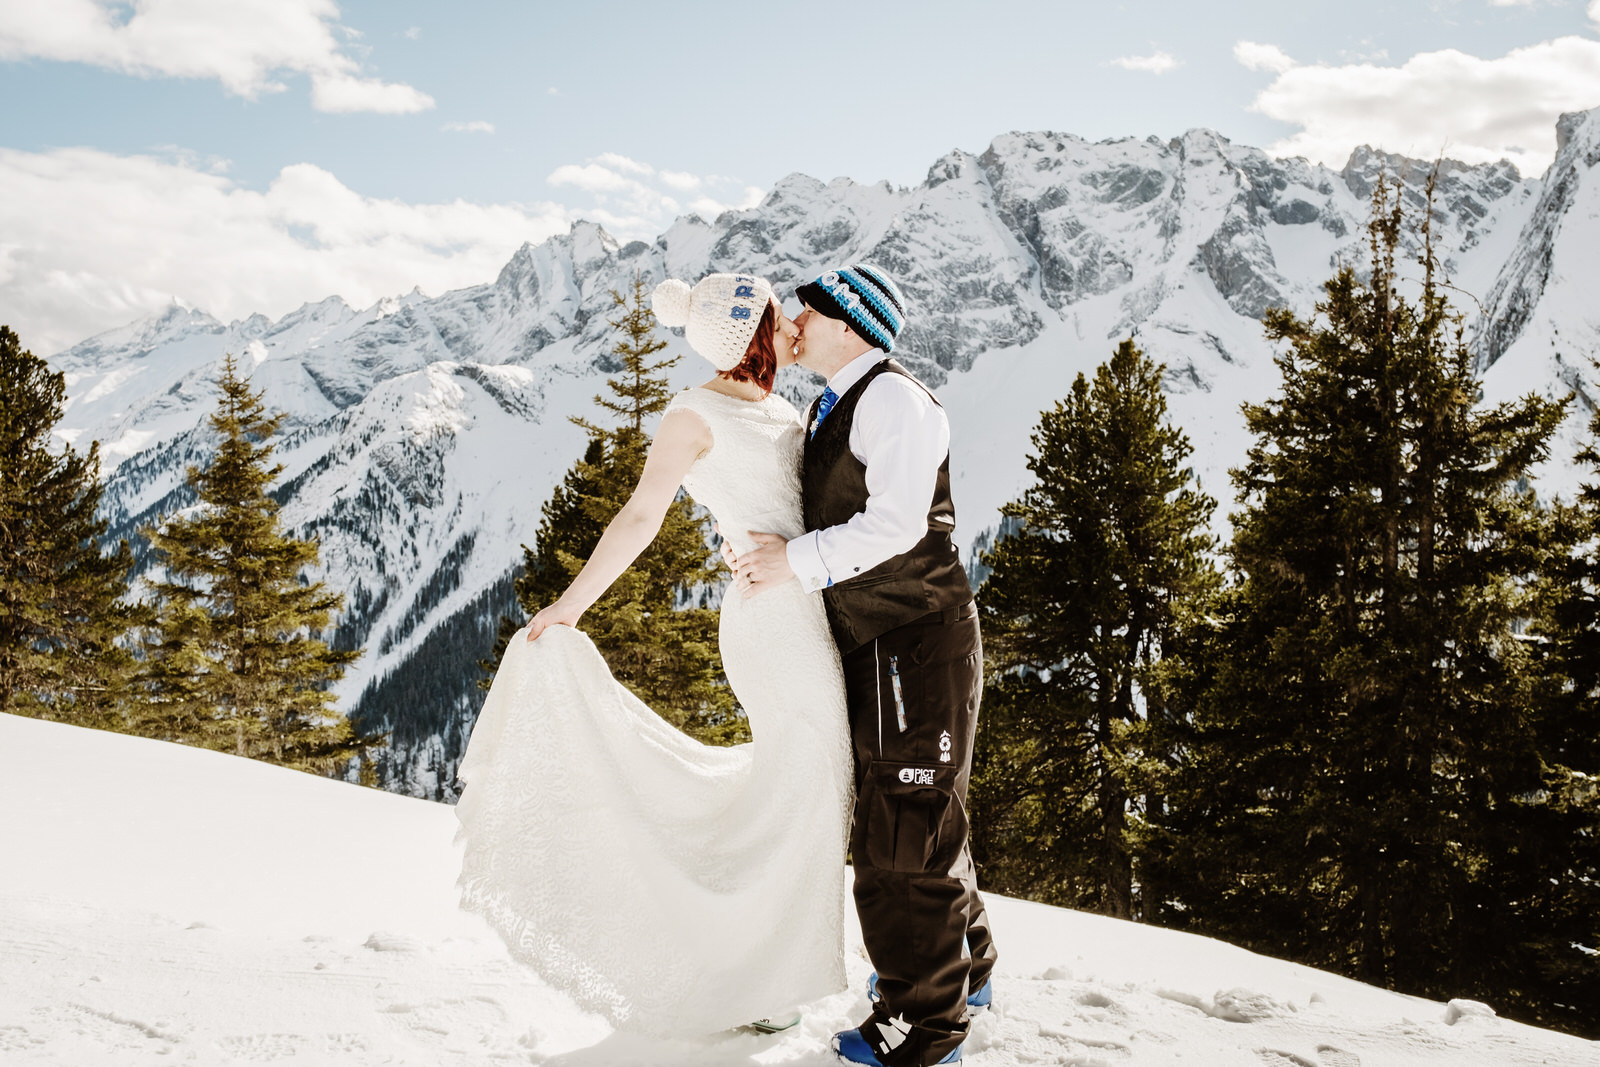 An Igloo Wedding At The White Lounge In Mayrhofen